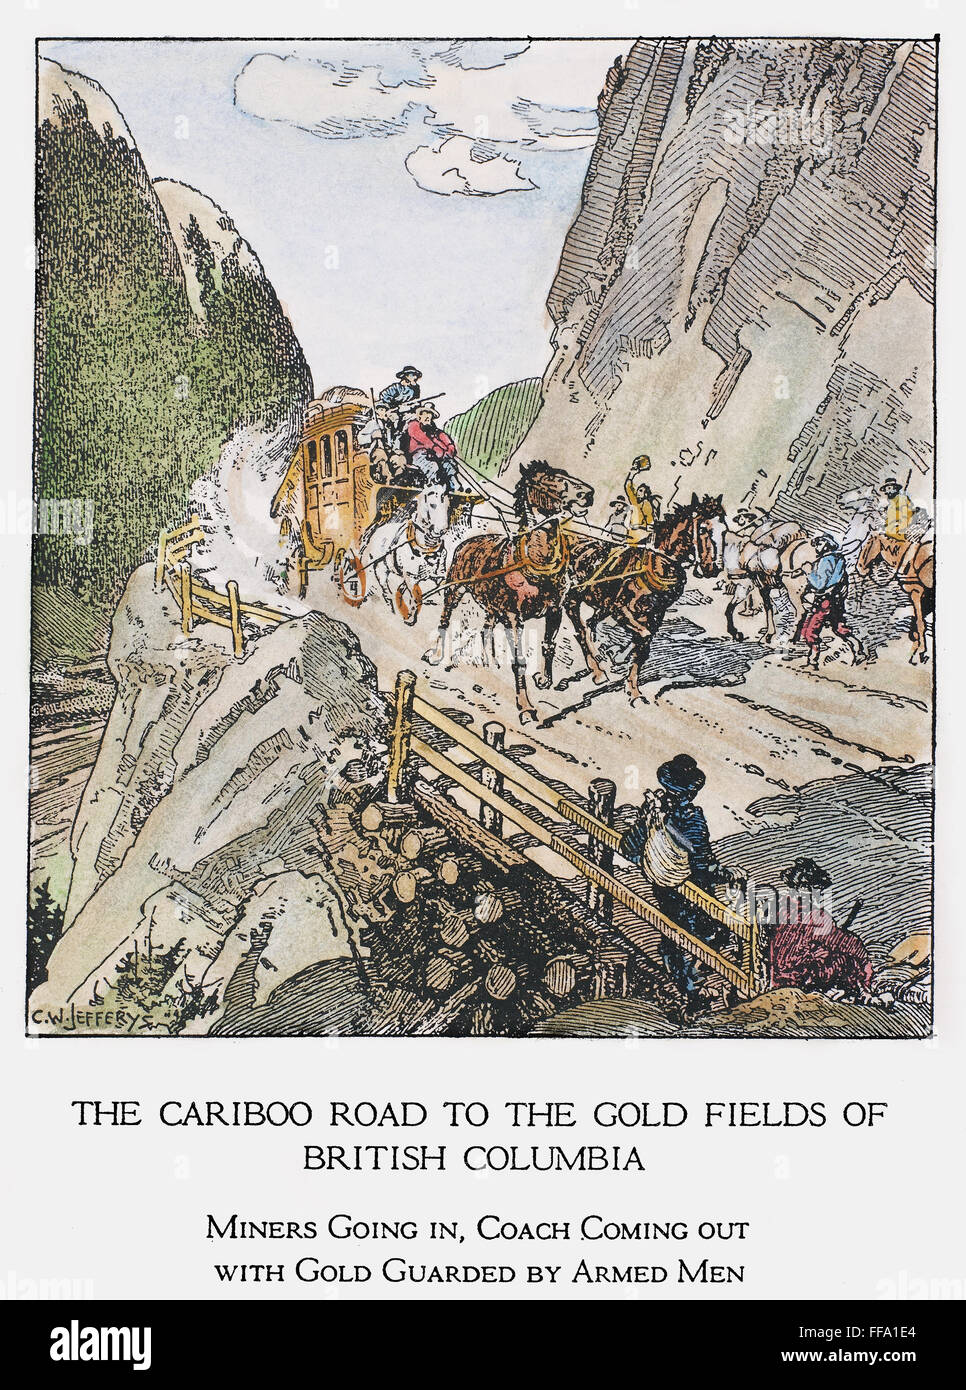 CANADA: GOLD MINING, 1860s. /nA coach with gold, guarded by armed men, passes miners headed for the gold fields of Cariboo country, British Columbia, Canada, along the Cariboo Road, completed in 1865. Drawing by C.W. Jefferys. Stock Photo